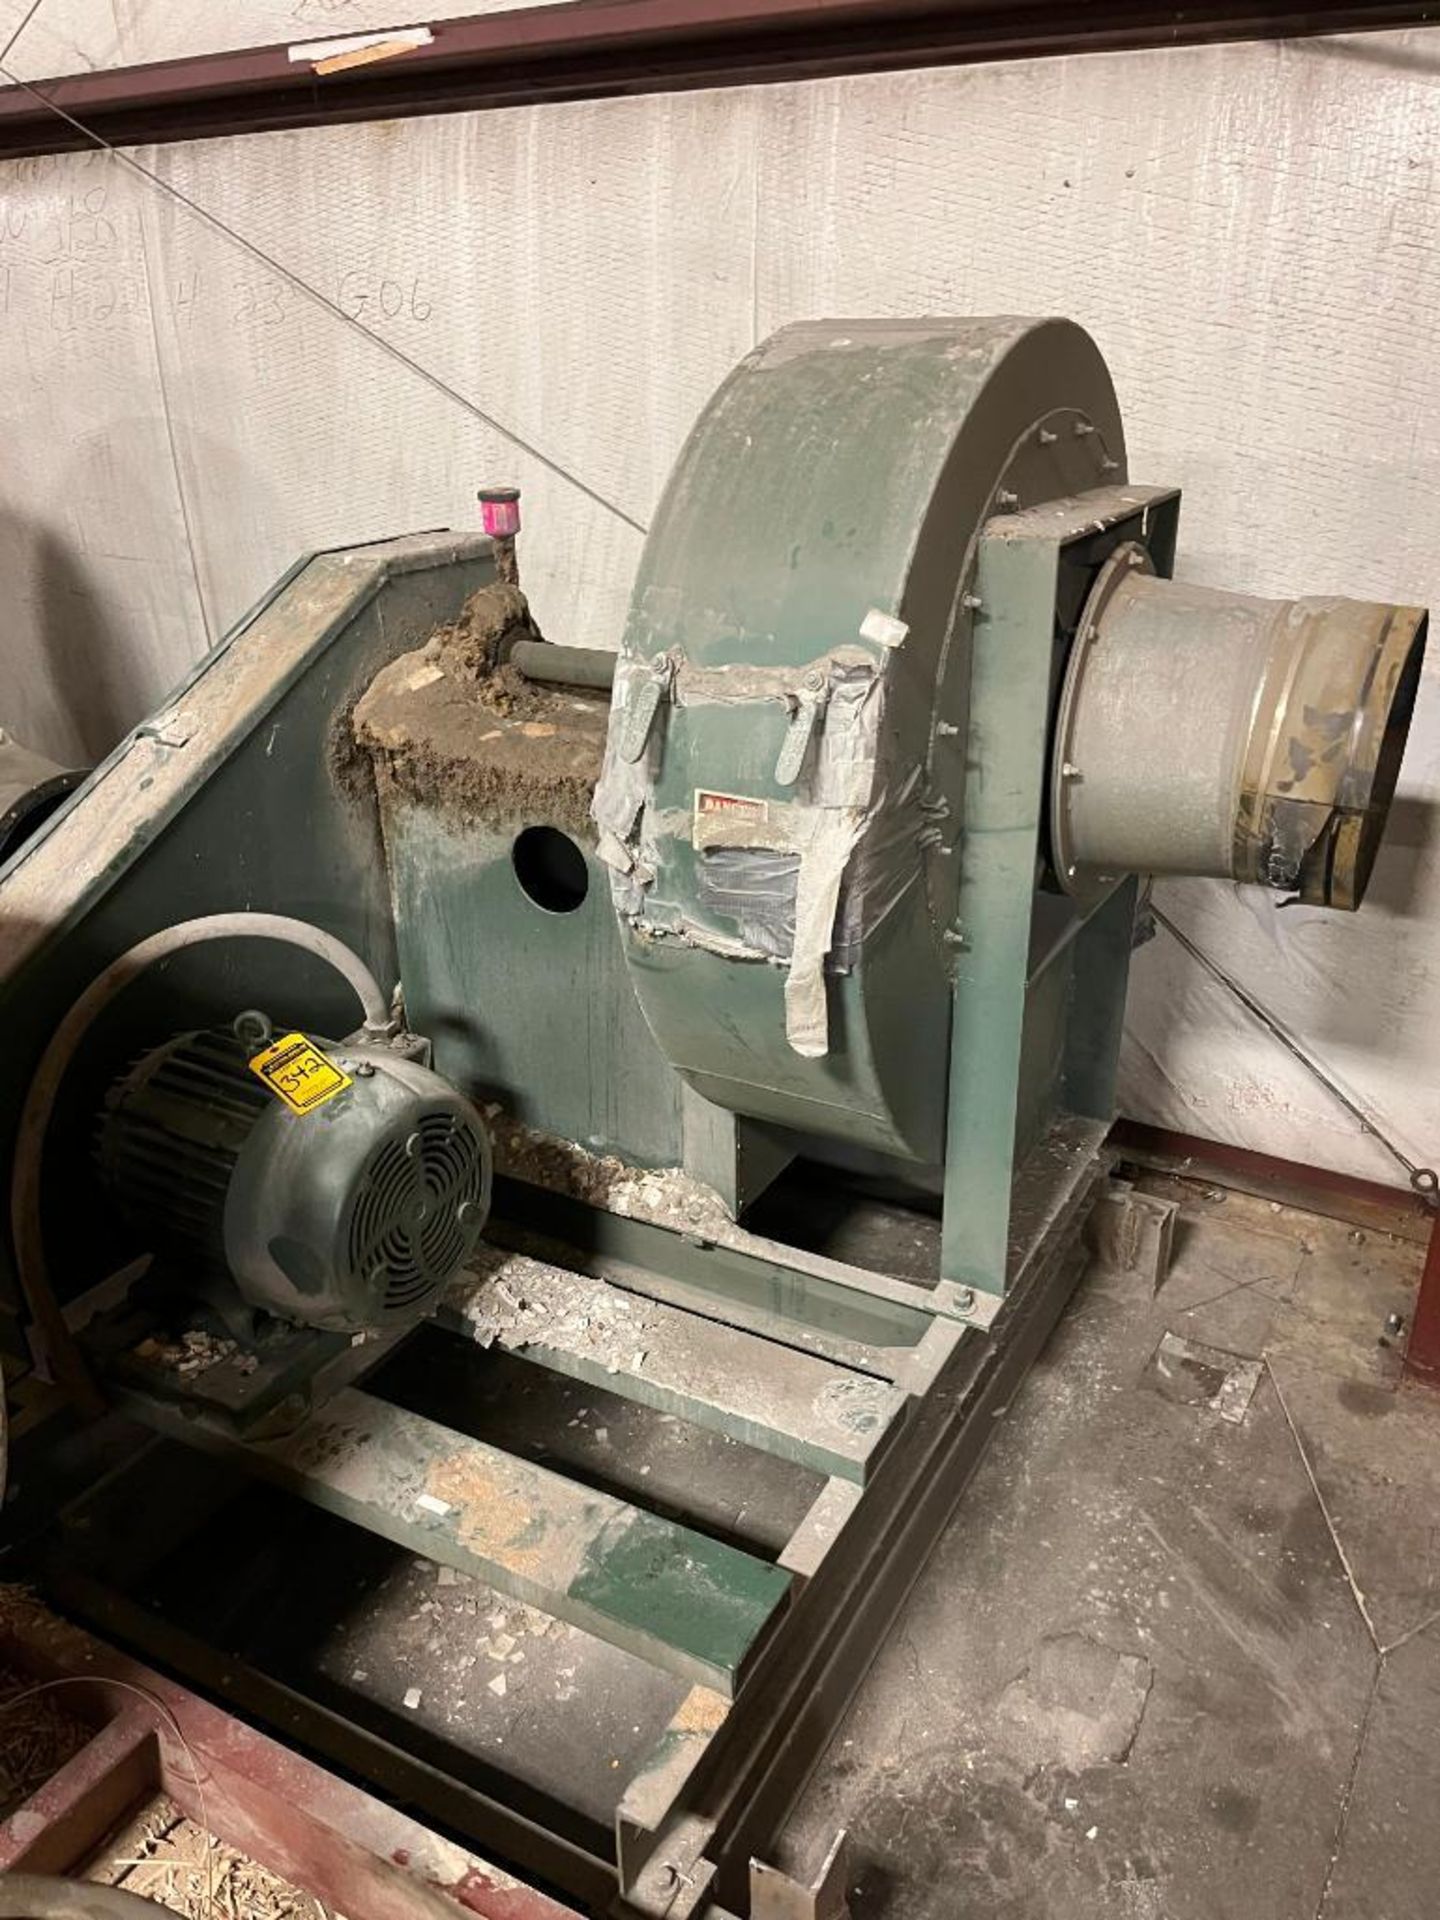 New York Blower 25 HP Horizontal Bottom Discharge Blower, Size 294, Shop# F-12061-100, PO I-8650-S - Image 2 of 7